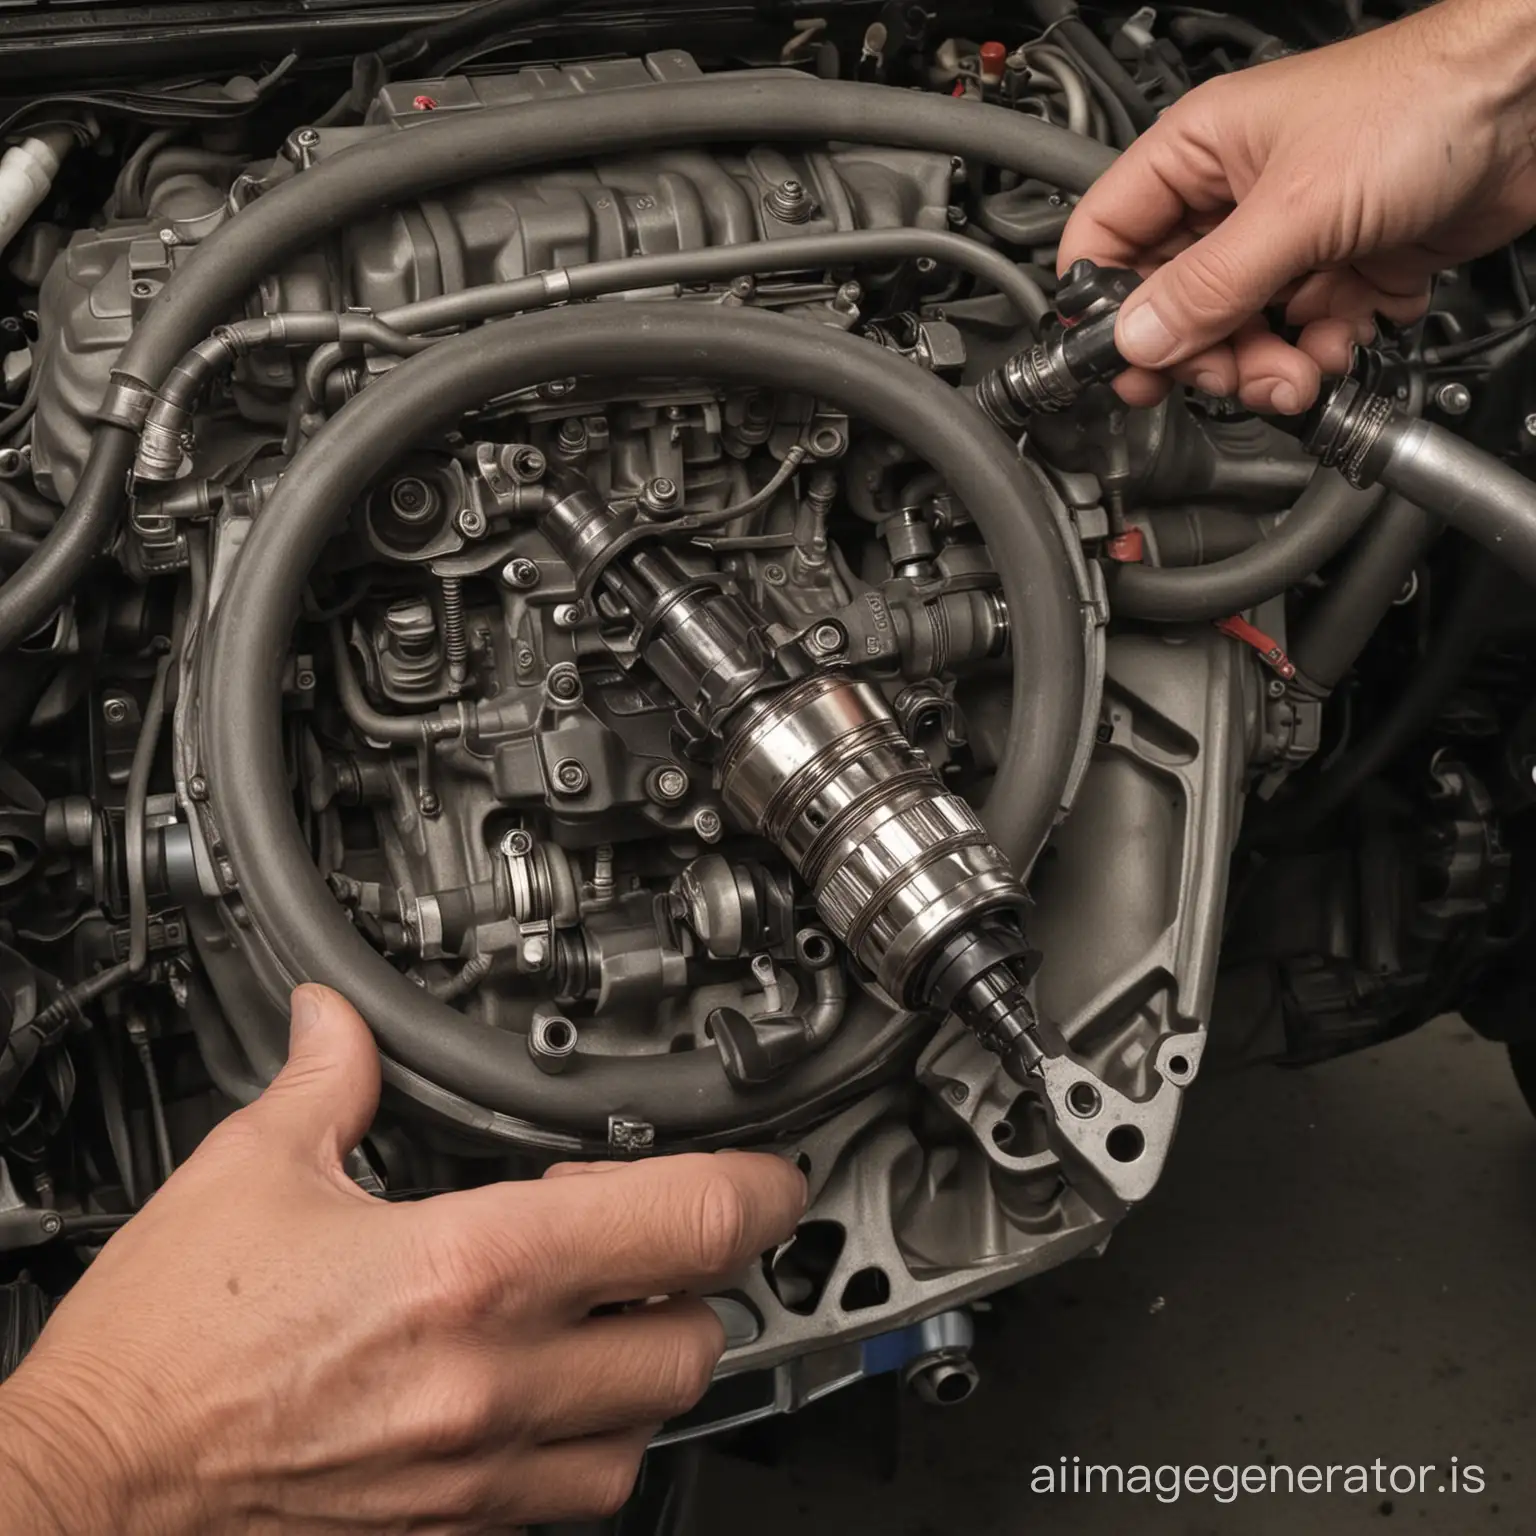 Successful Engine Start After Spark Plug Replacement AI Image  